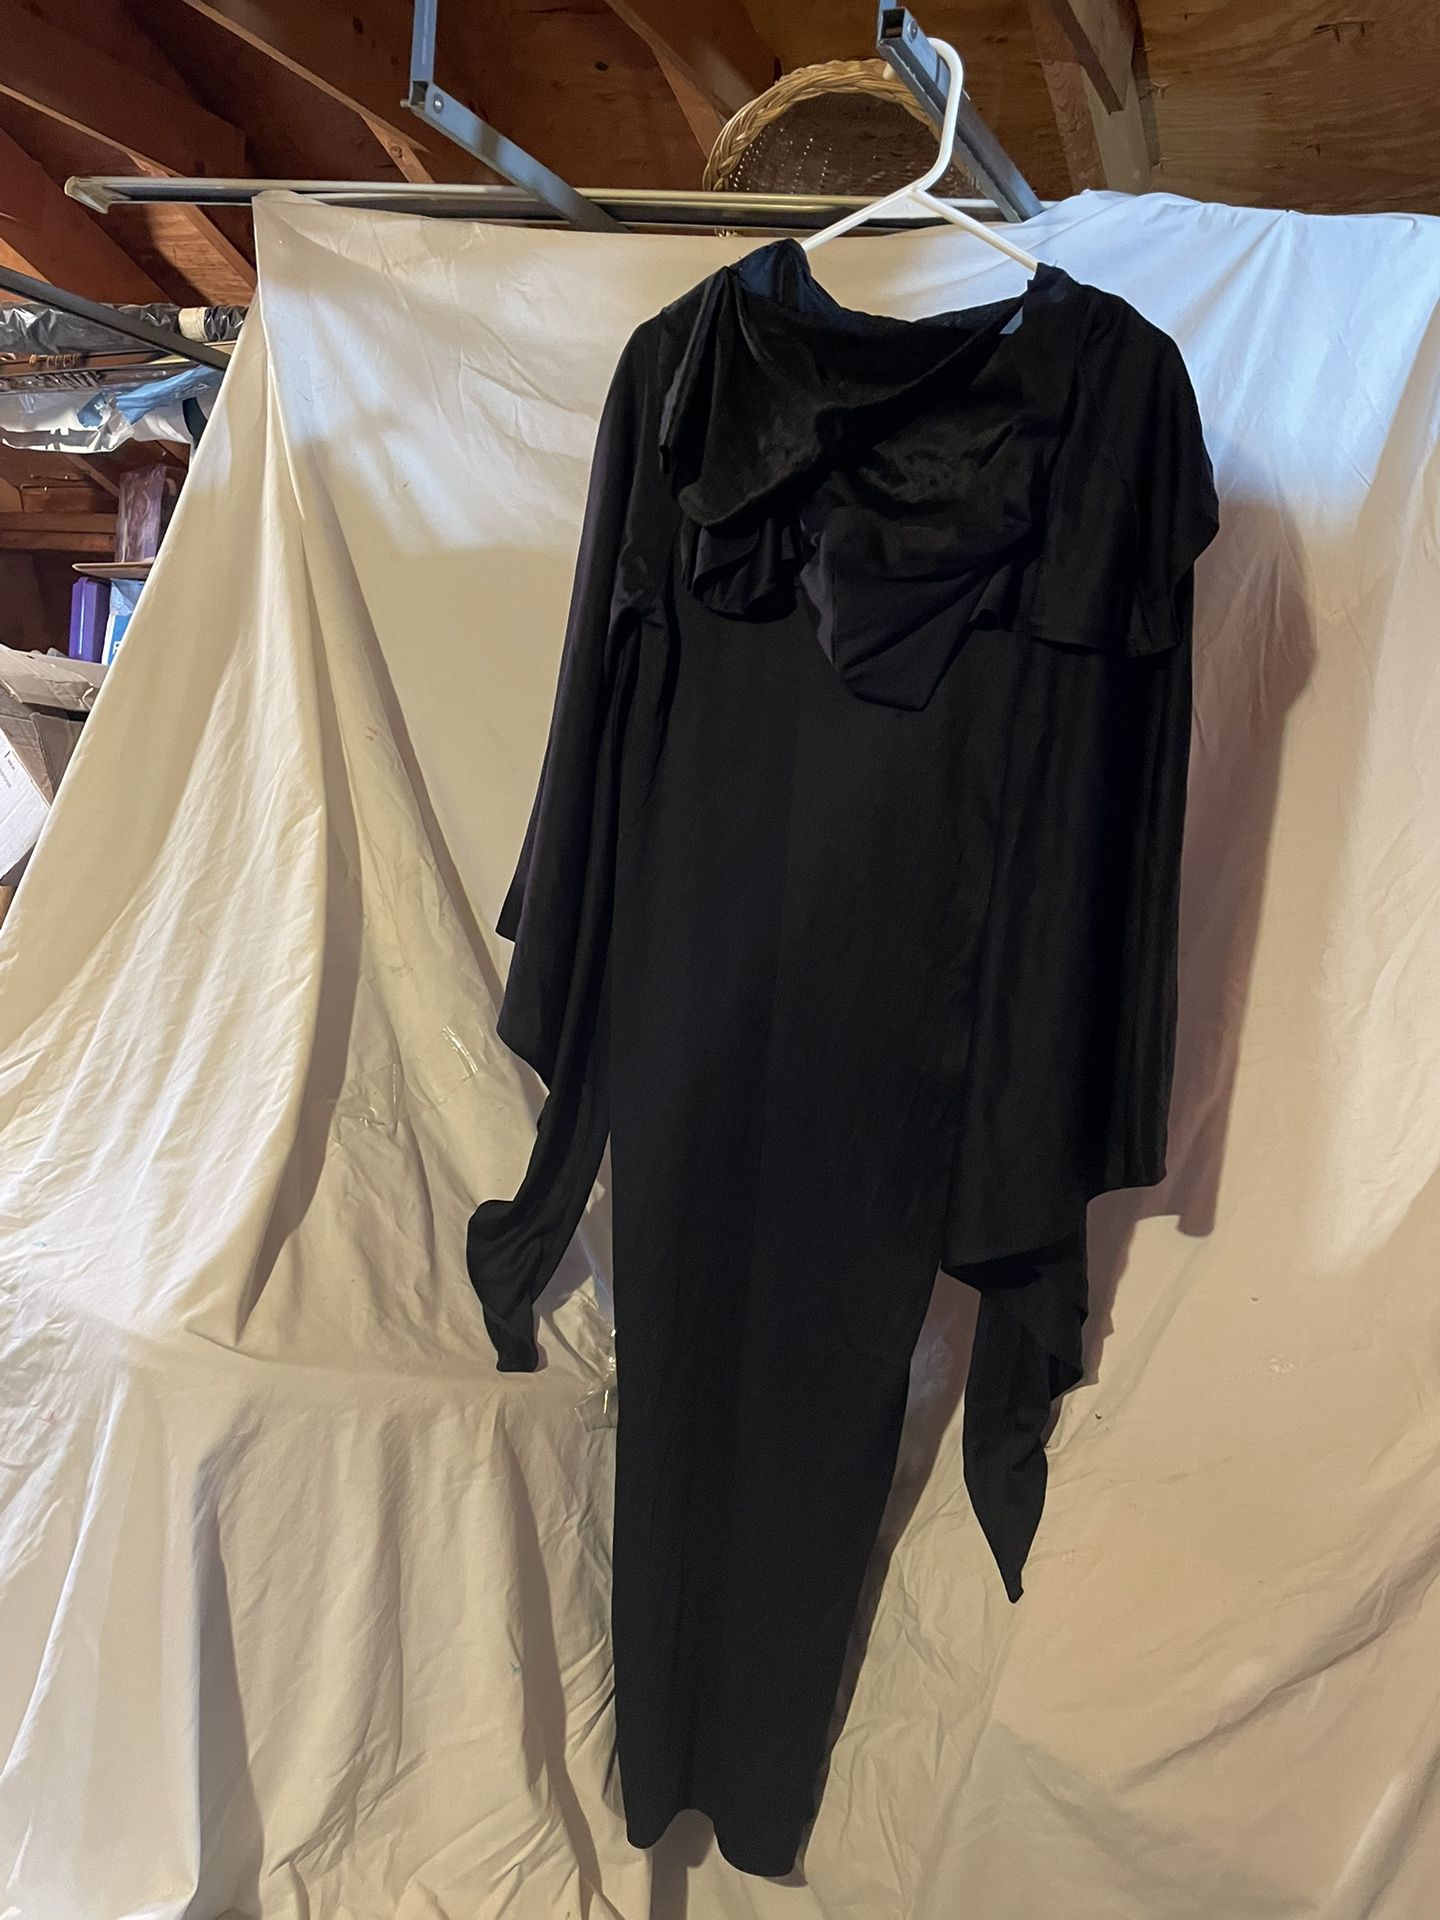 Black Robe With Hood And Face Covering  costume 